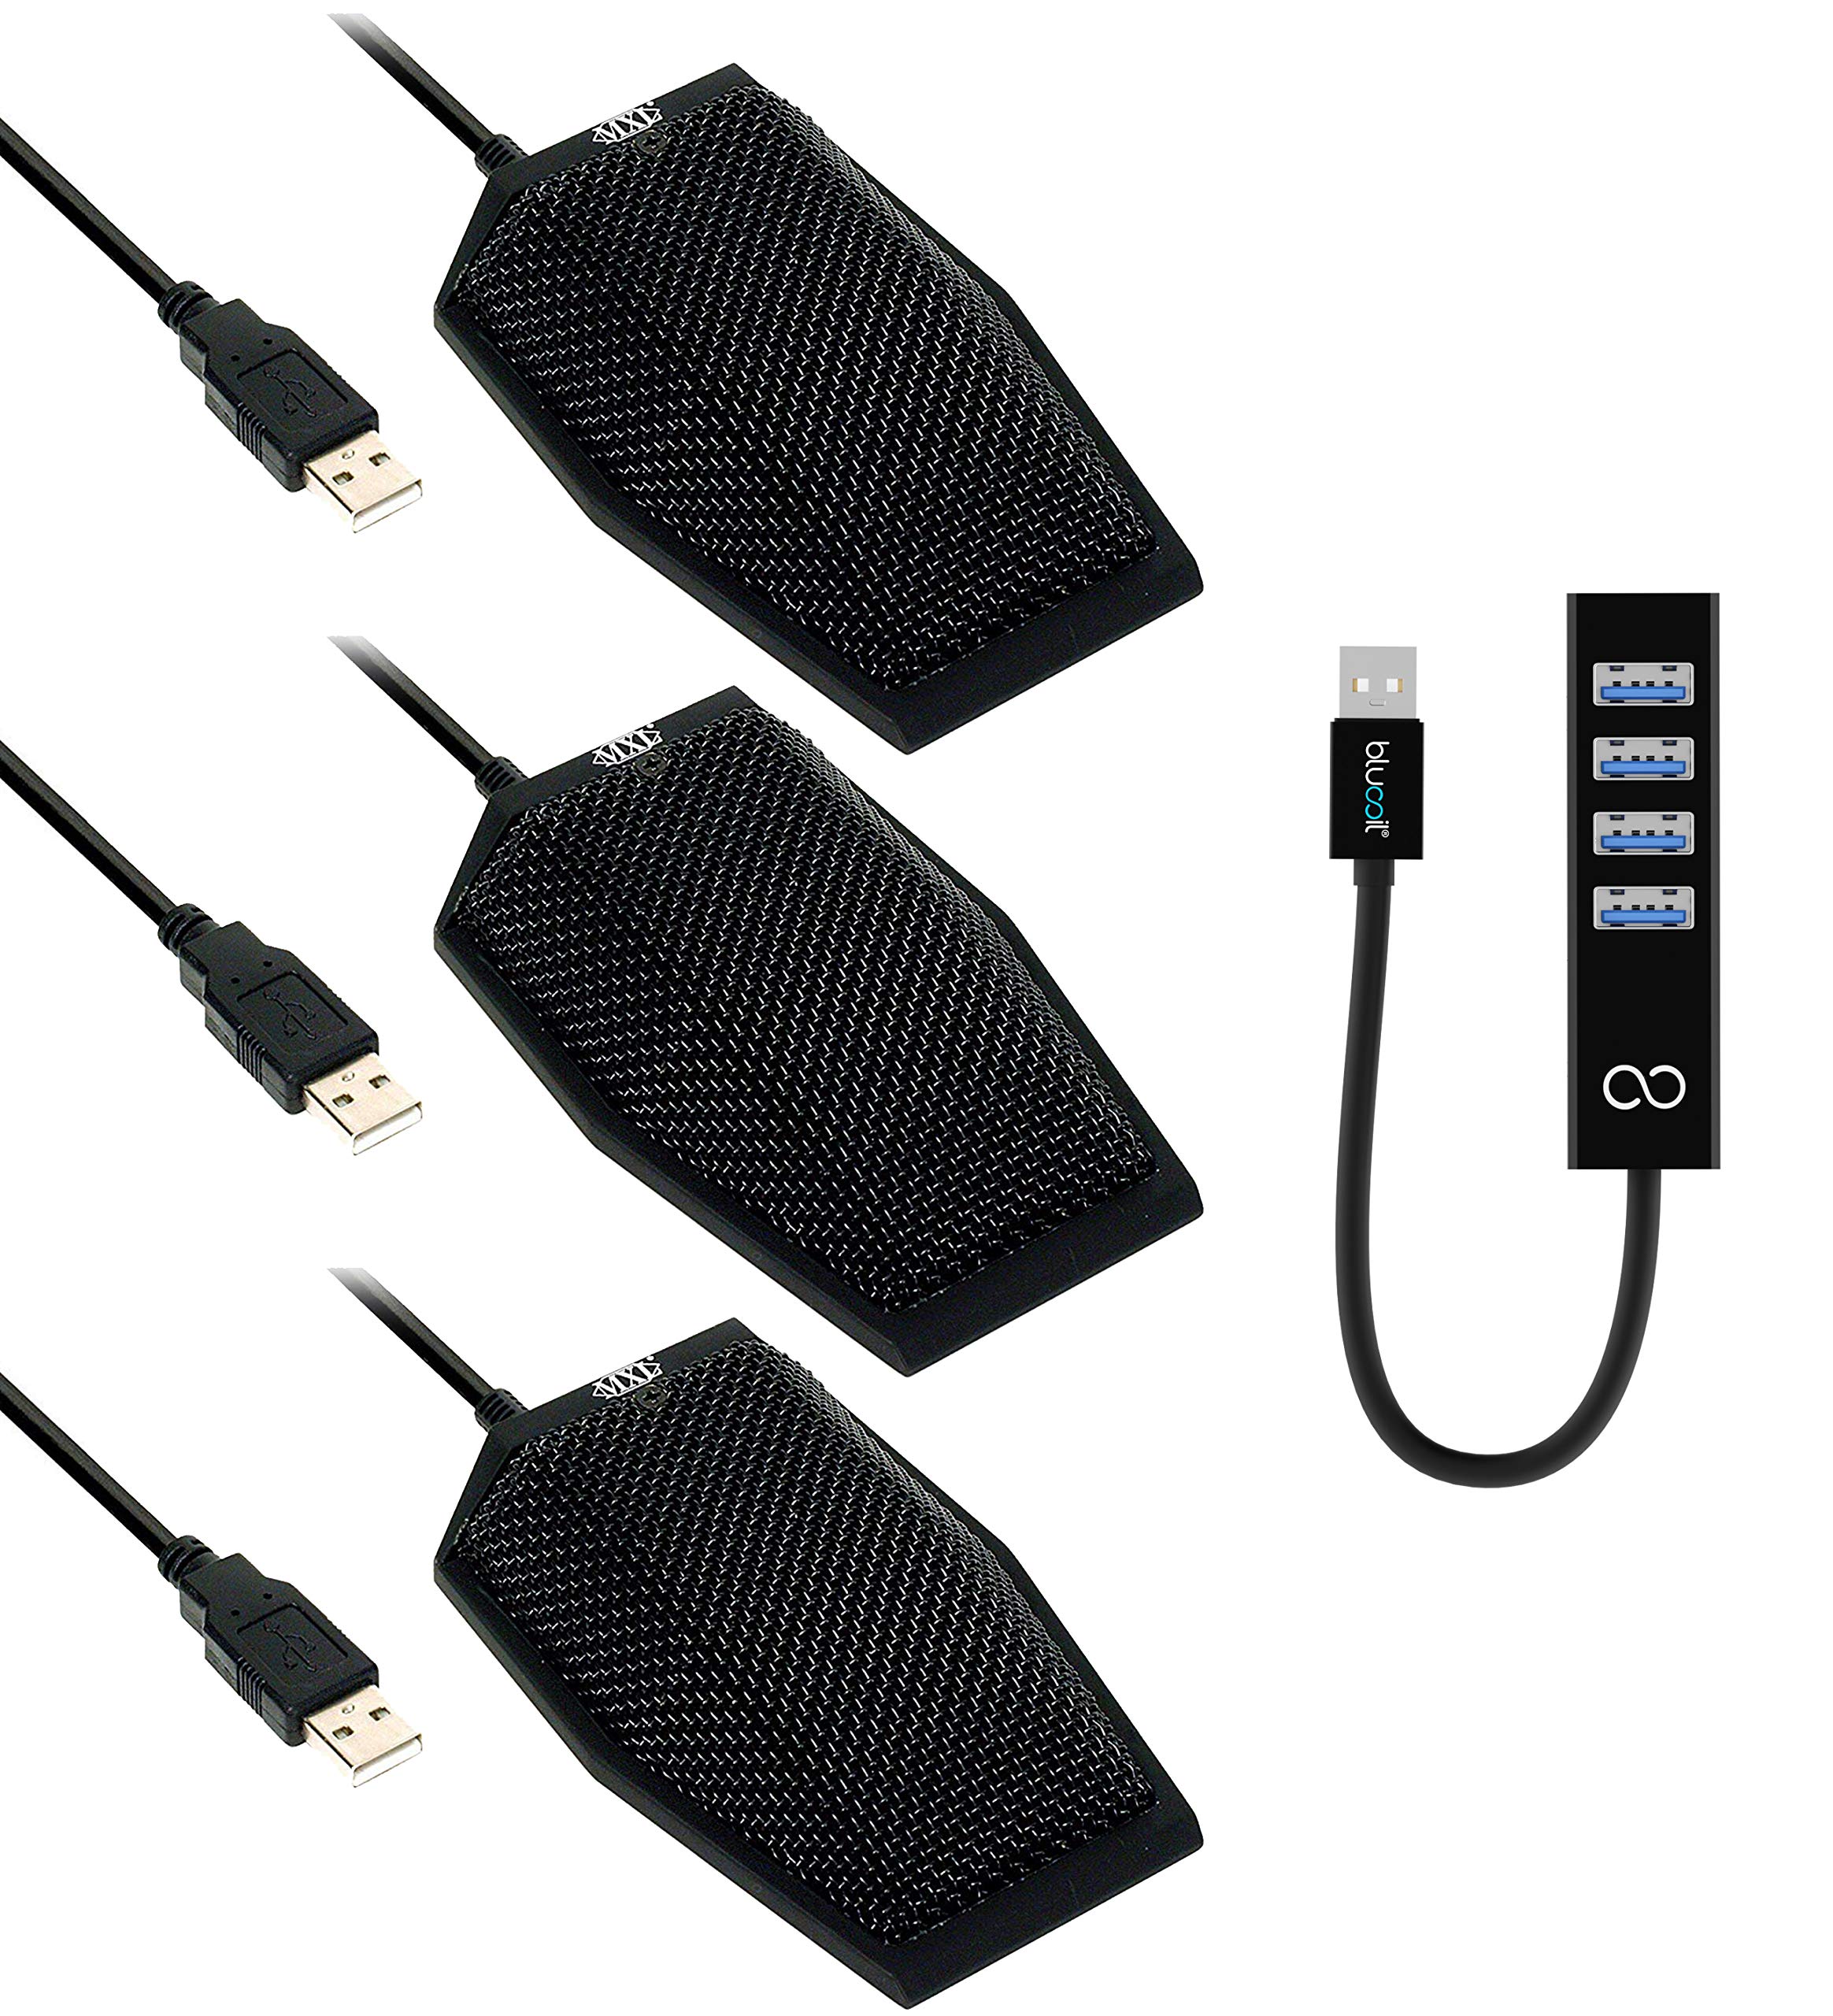 MXL AC-404 USB Conference Microphones for Web Conferencing, Game Streaming, Court Reporting on Windows and Mac (3-Pack, Black) Bundle with Blucoil ...